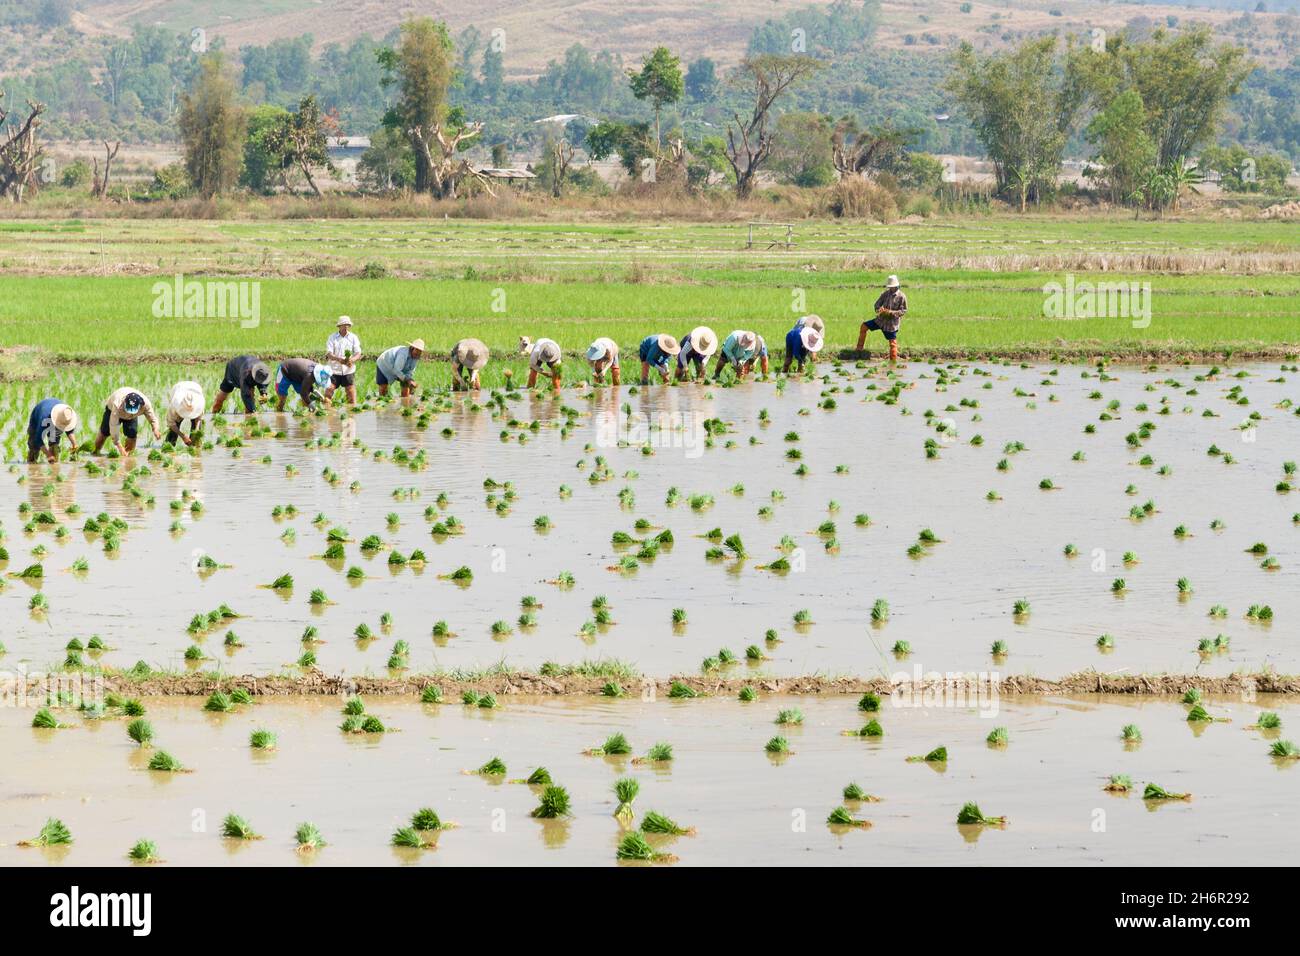 Farmers planting rice paddy in a field, Thailand Stock Photo